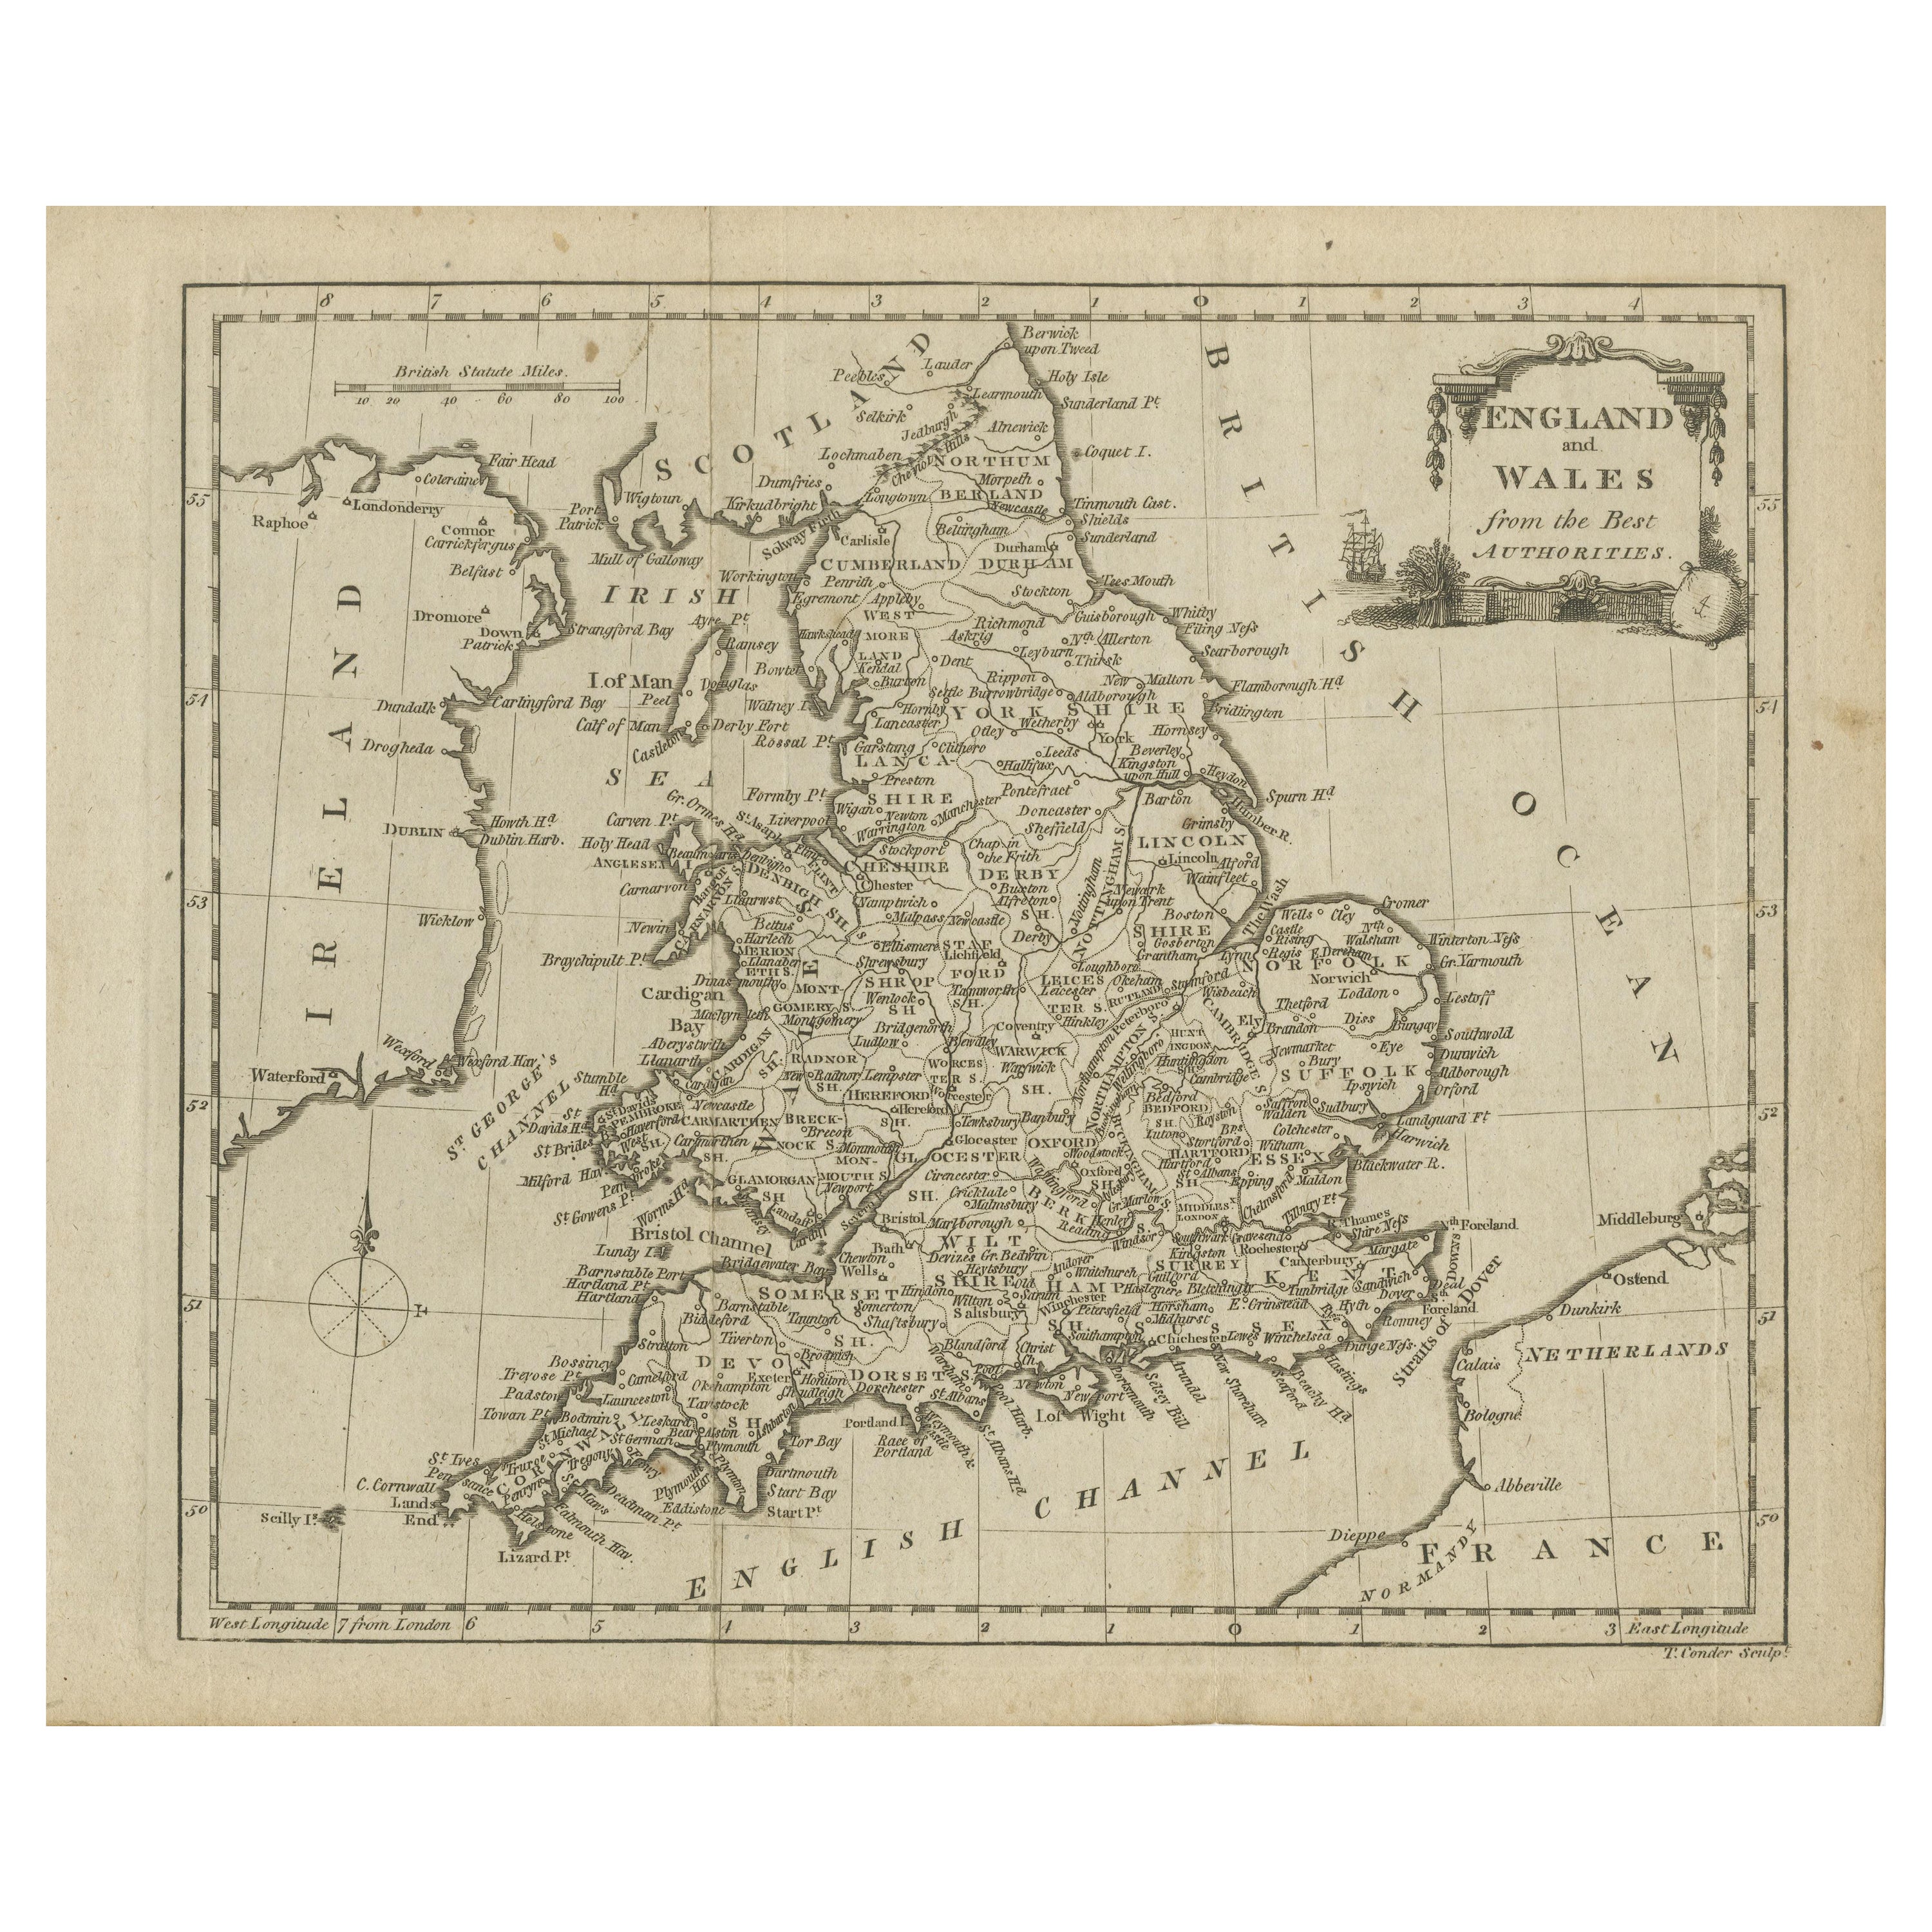 Original Antique Map of England and Wales, with Decorative Cartouche